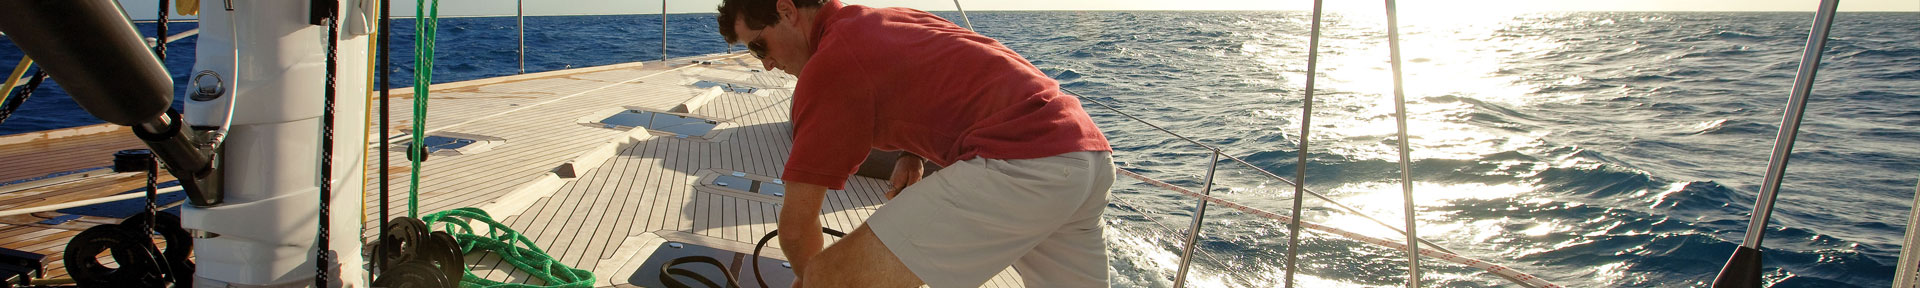 Deck hand tying ropes on a superyacht